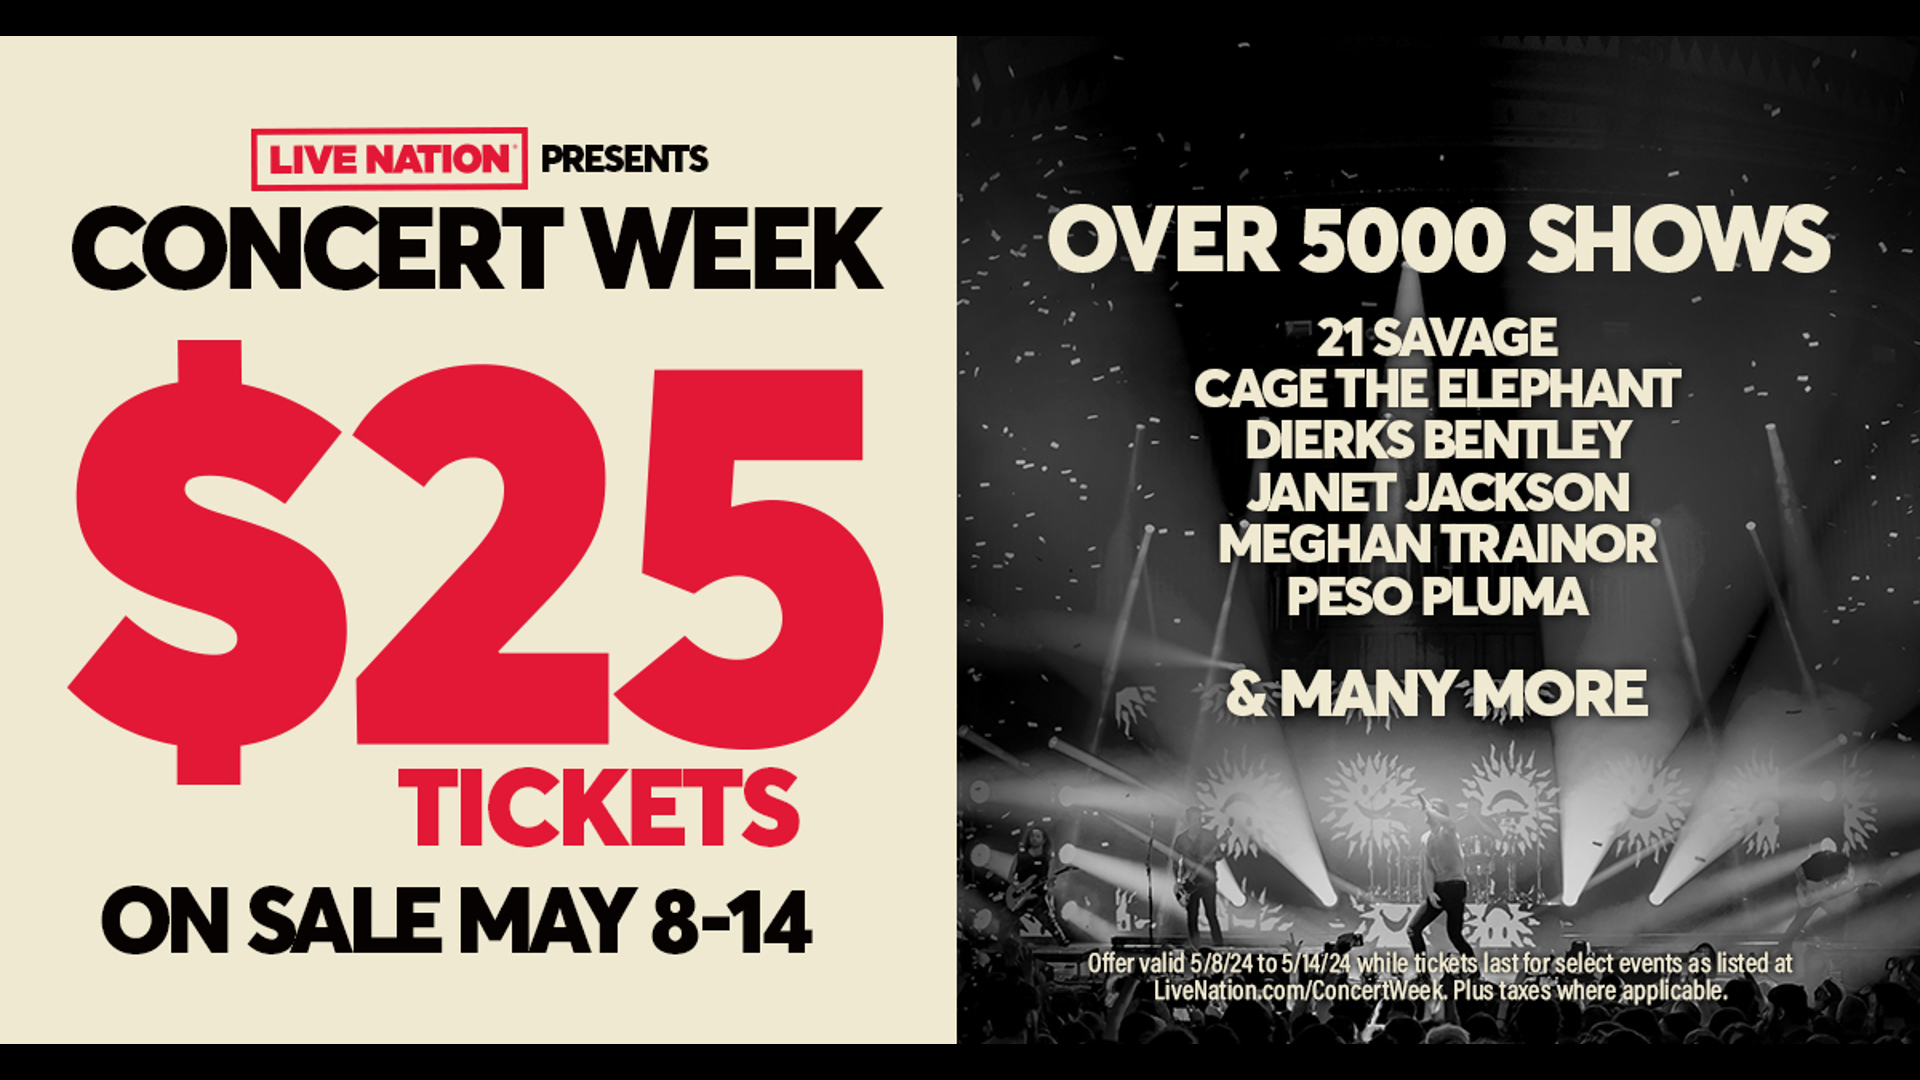 For one week only, fans can buy tickets to some Live Nation concerts for $25.